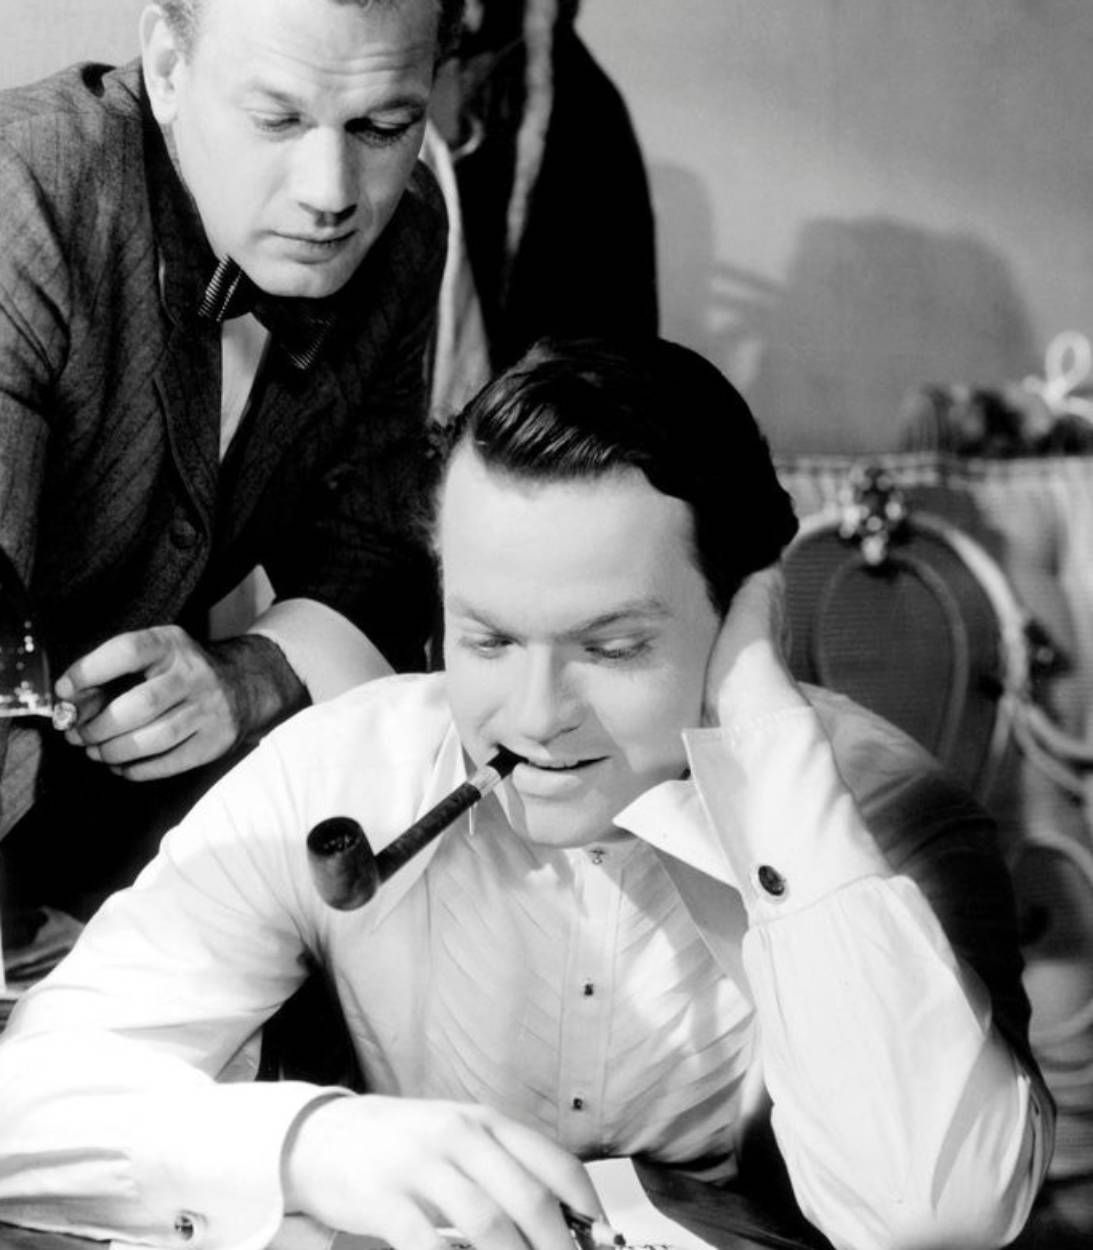 Kane working on a story in Citizen Kane pic vertical